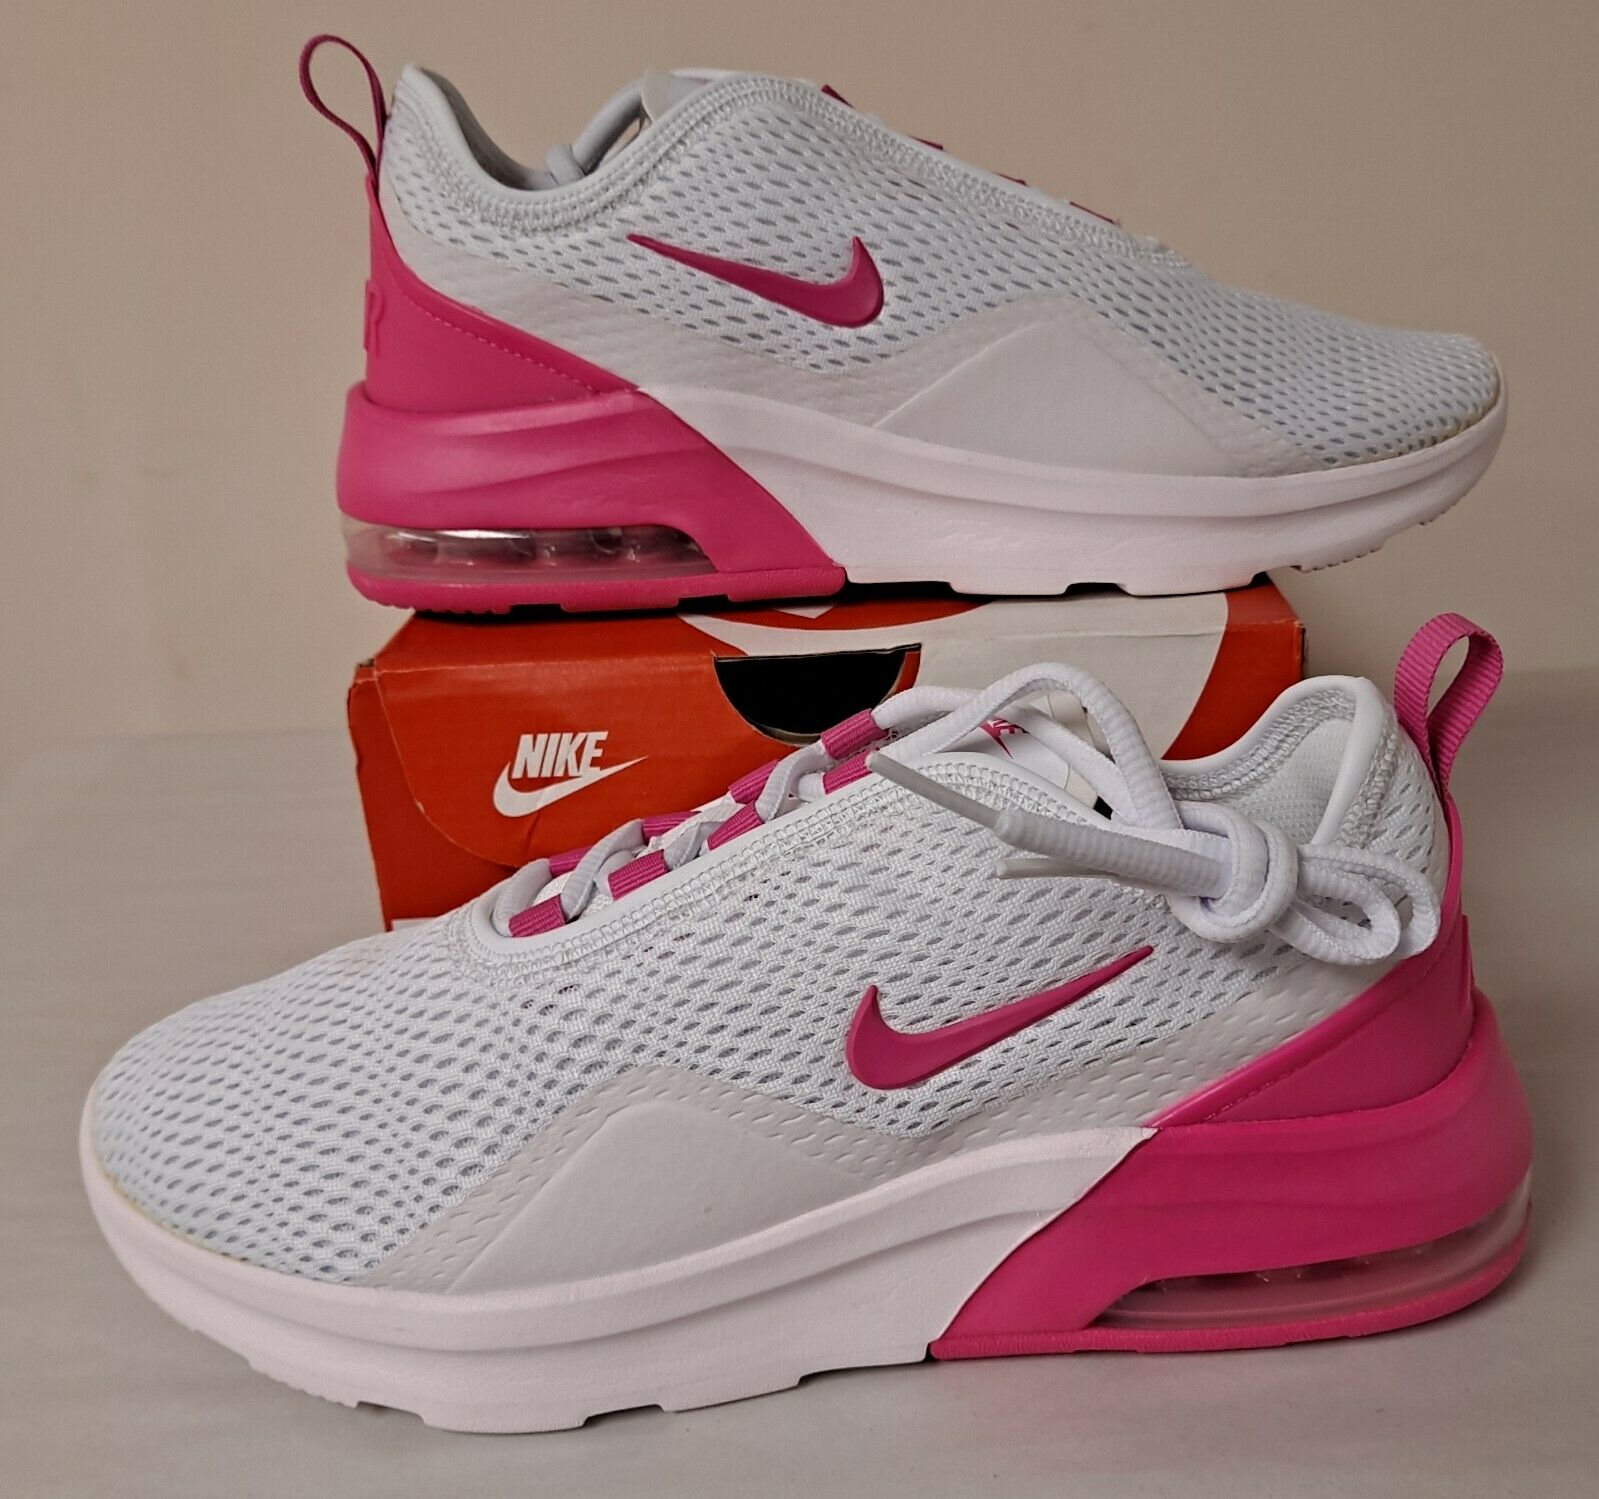 Nike Air Max Motion 2 Women's Shoes Sneakers Trainers AO0352 102 Size 7